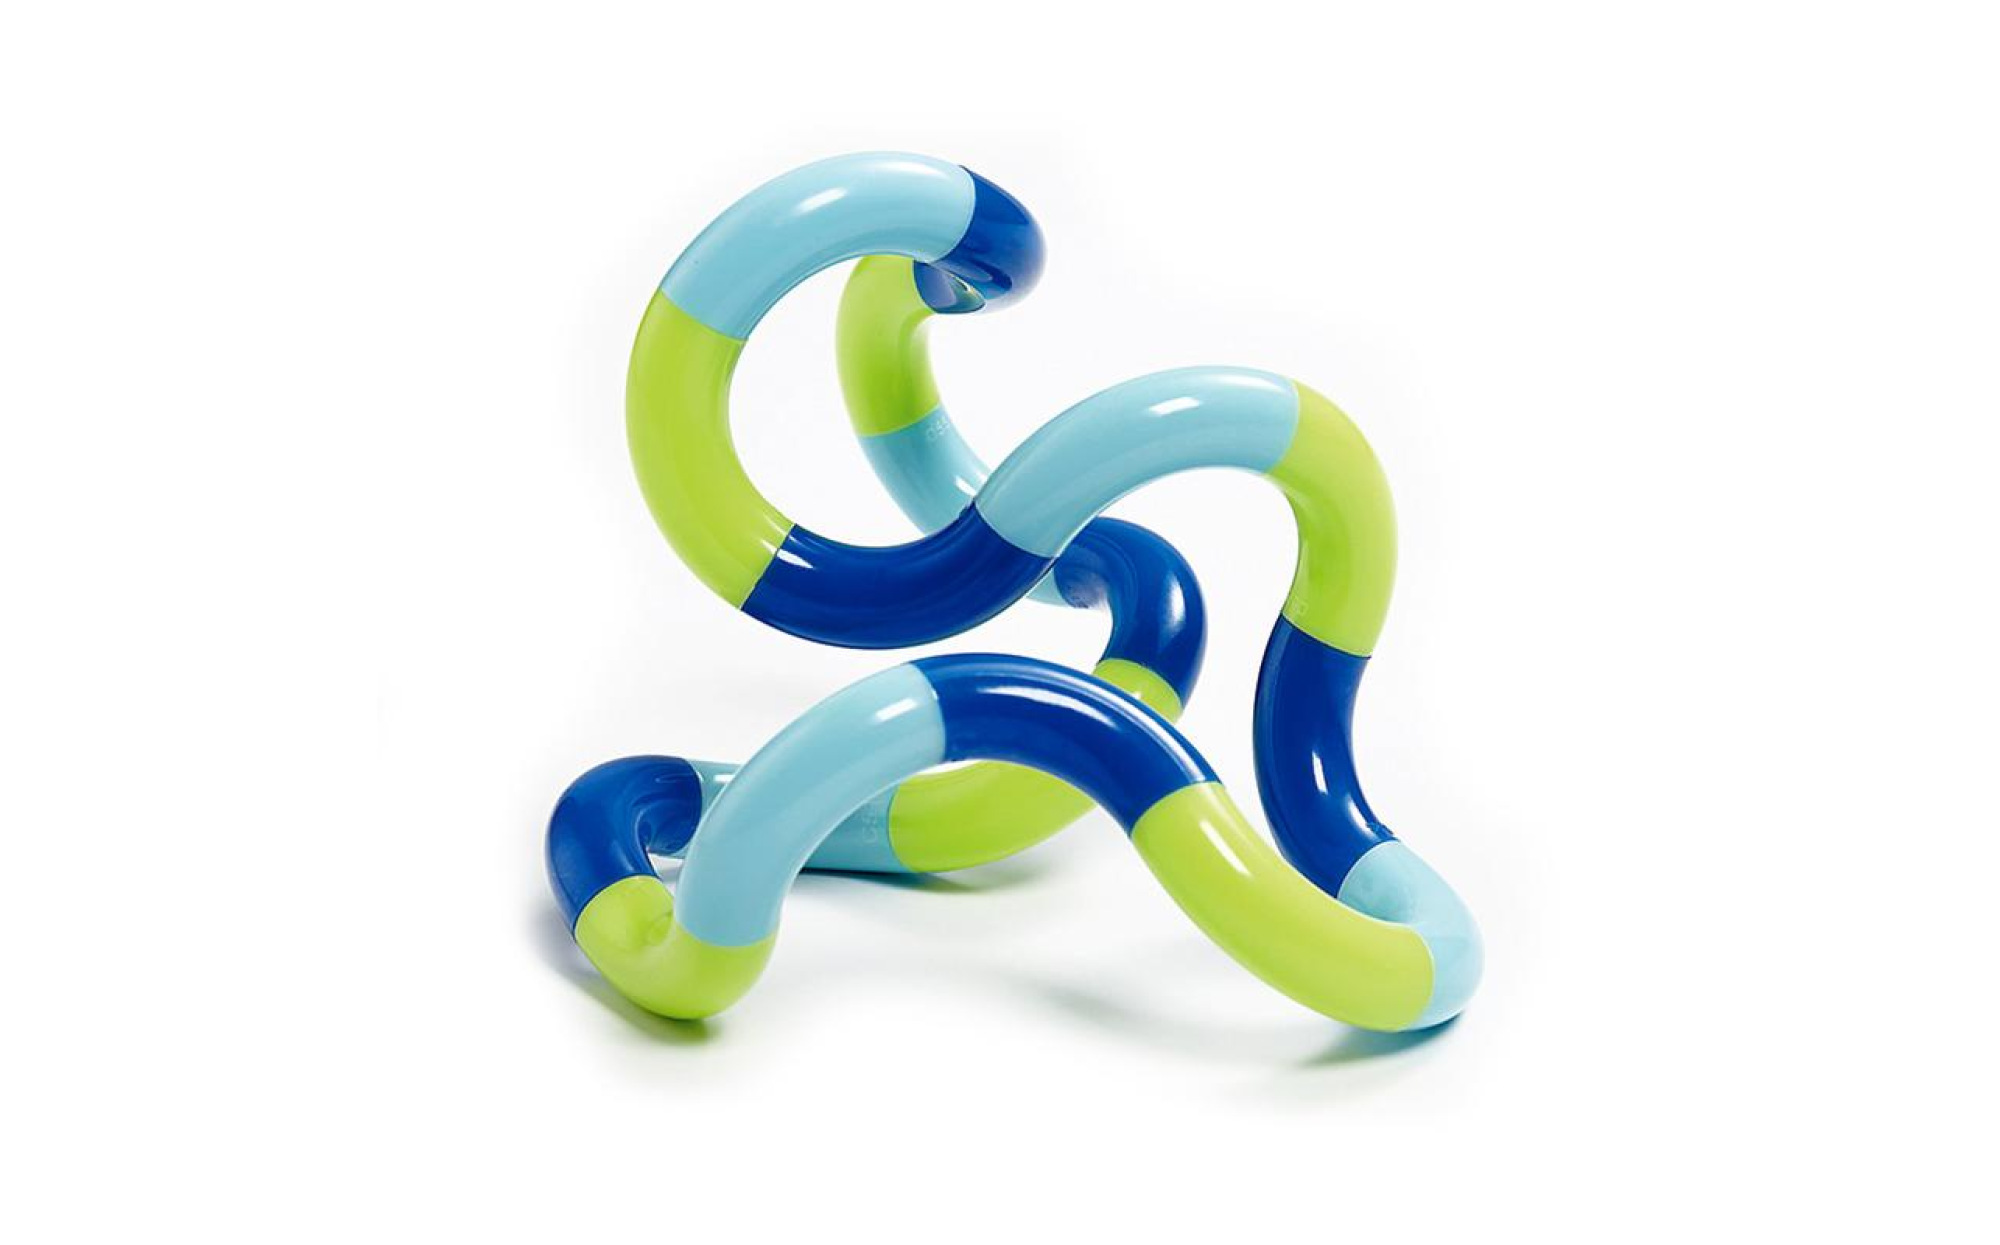 Tangle Jr Classic Pack of 3 Fidget Item ADHD Toy Stress Reliever 